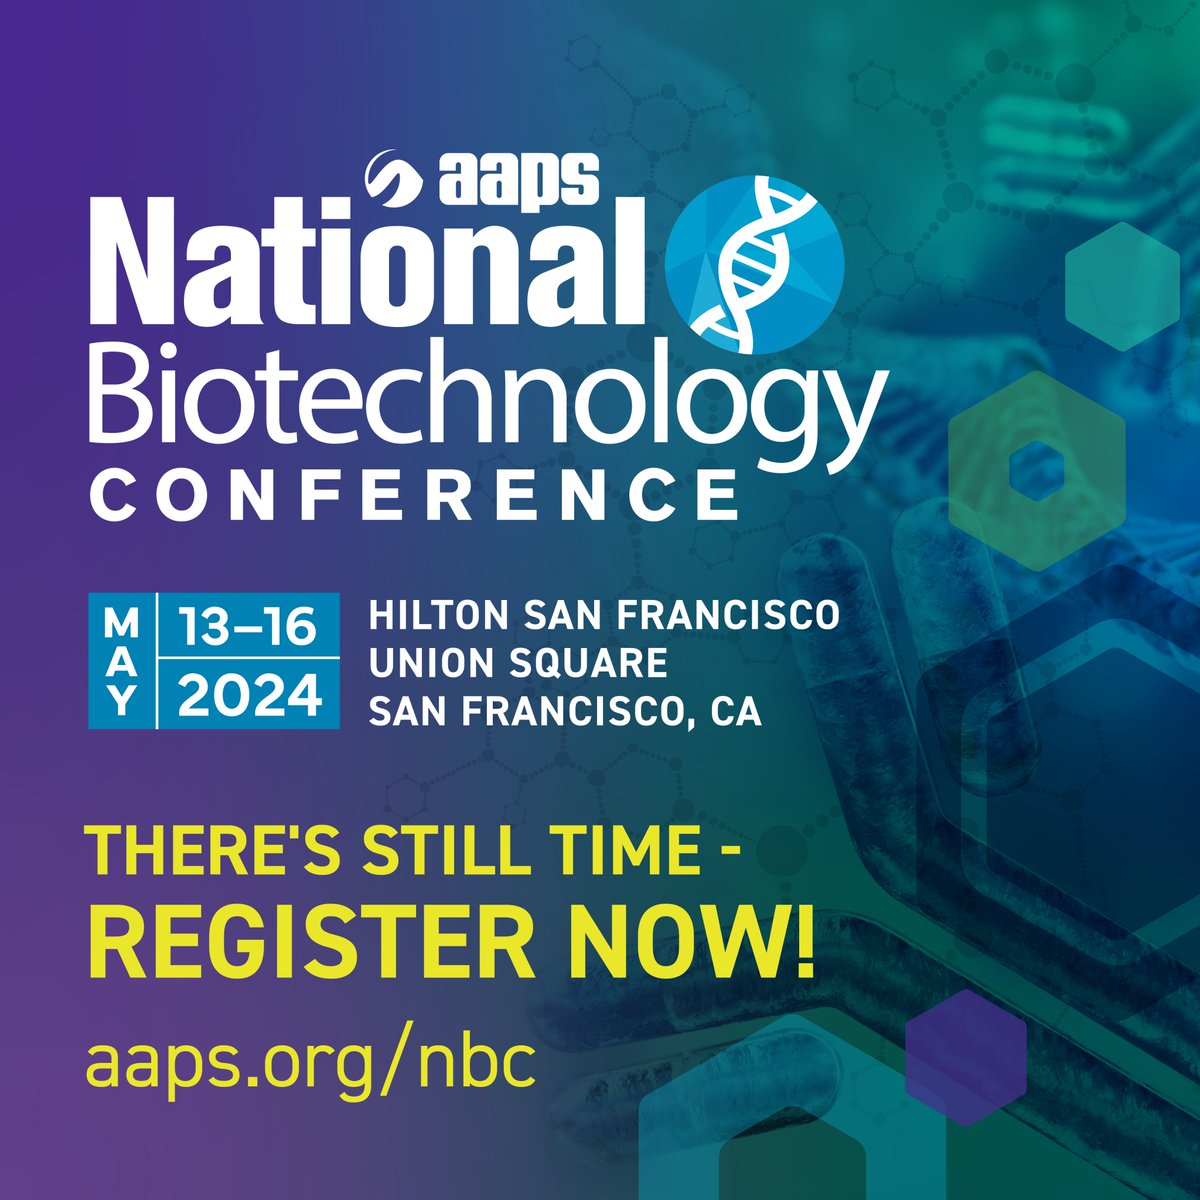 #Biotech executives are encouraged to register for the exclusive executive track session, “Cell and Gene Therapies at the Intersection of Business and Science,” on May 14 during our National Biotechnology Conference, #NBC2024, in San Francisco. Join us: bit.ly/NBCExecutiveTr…